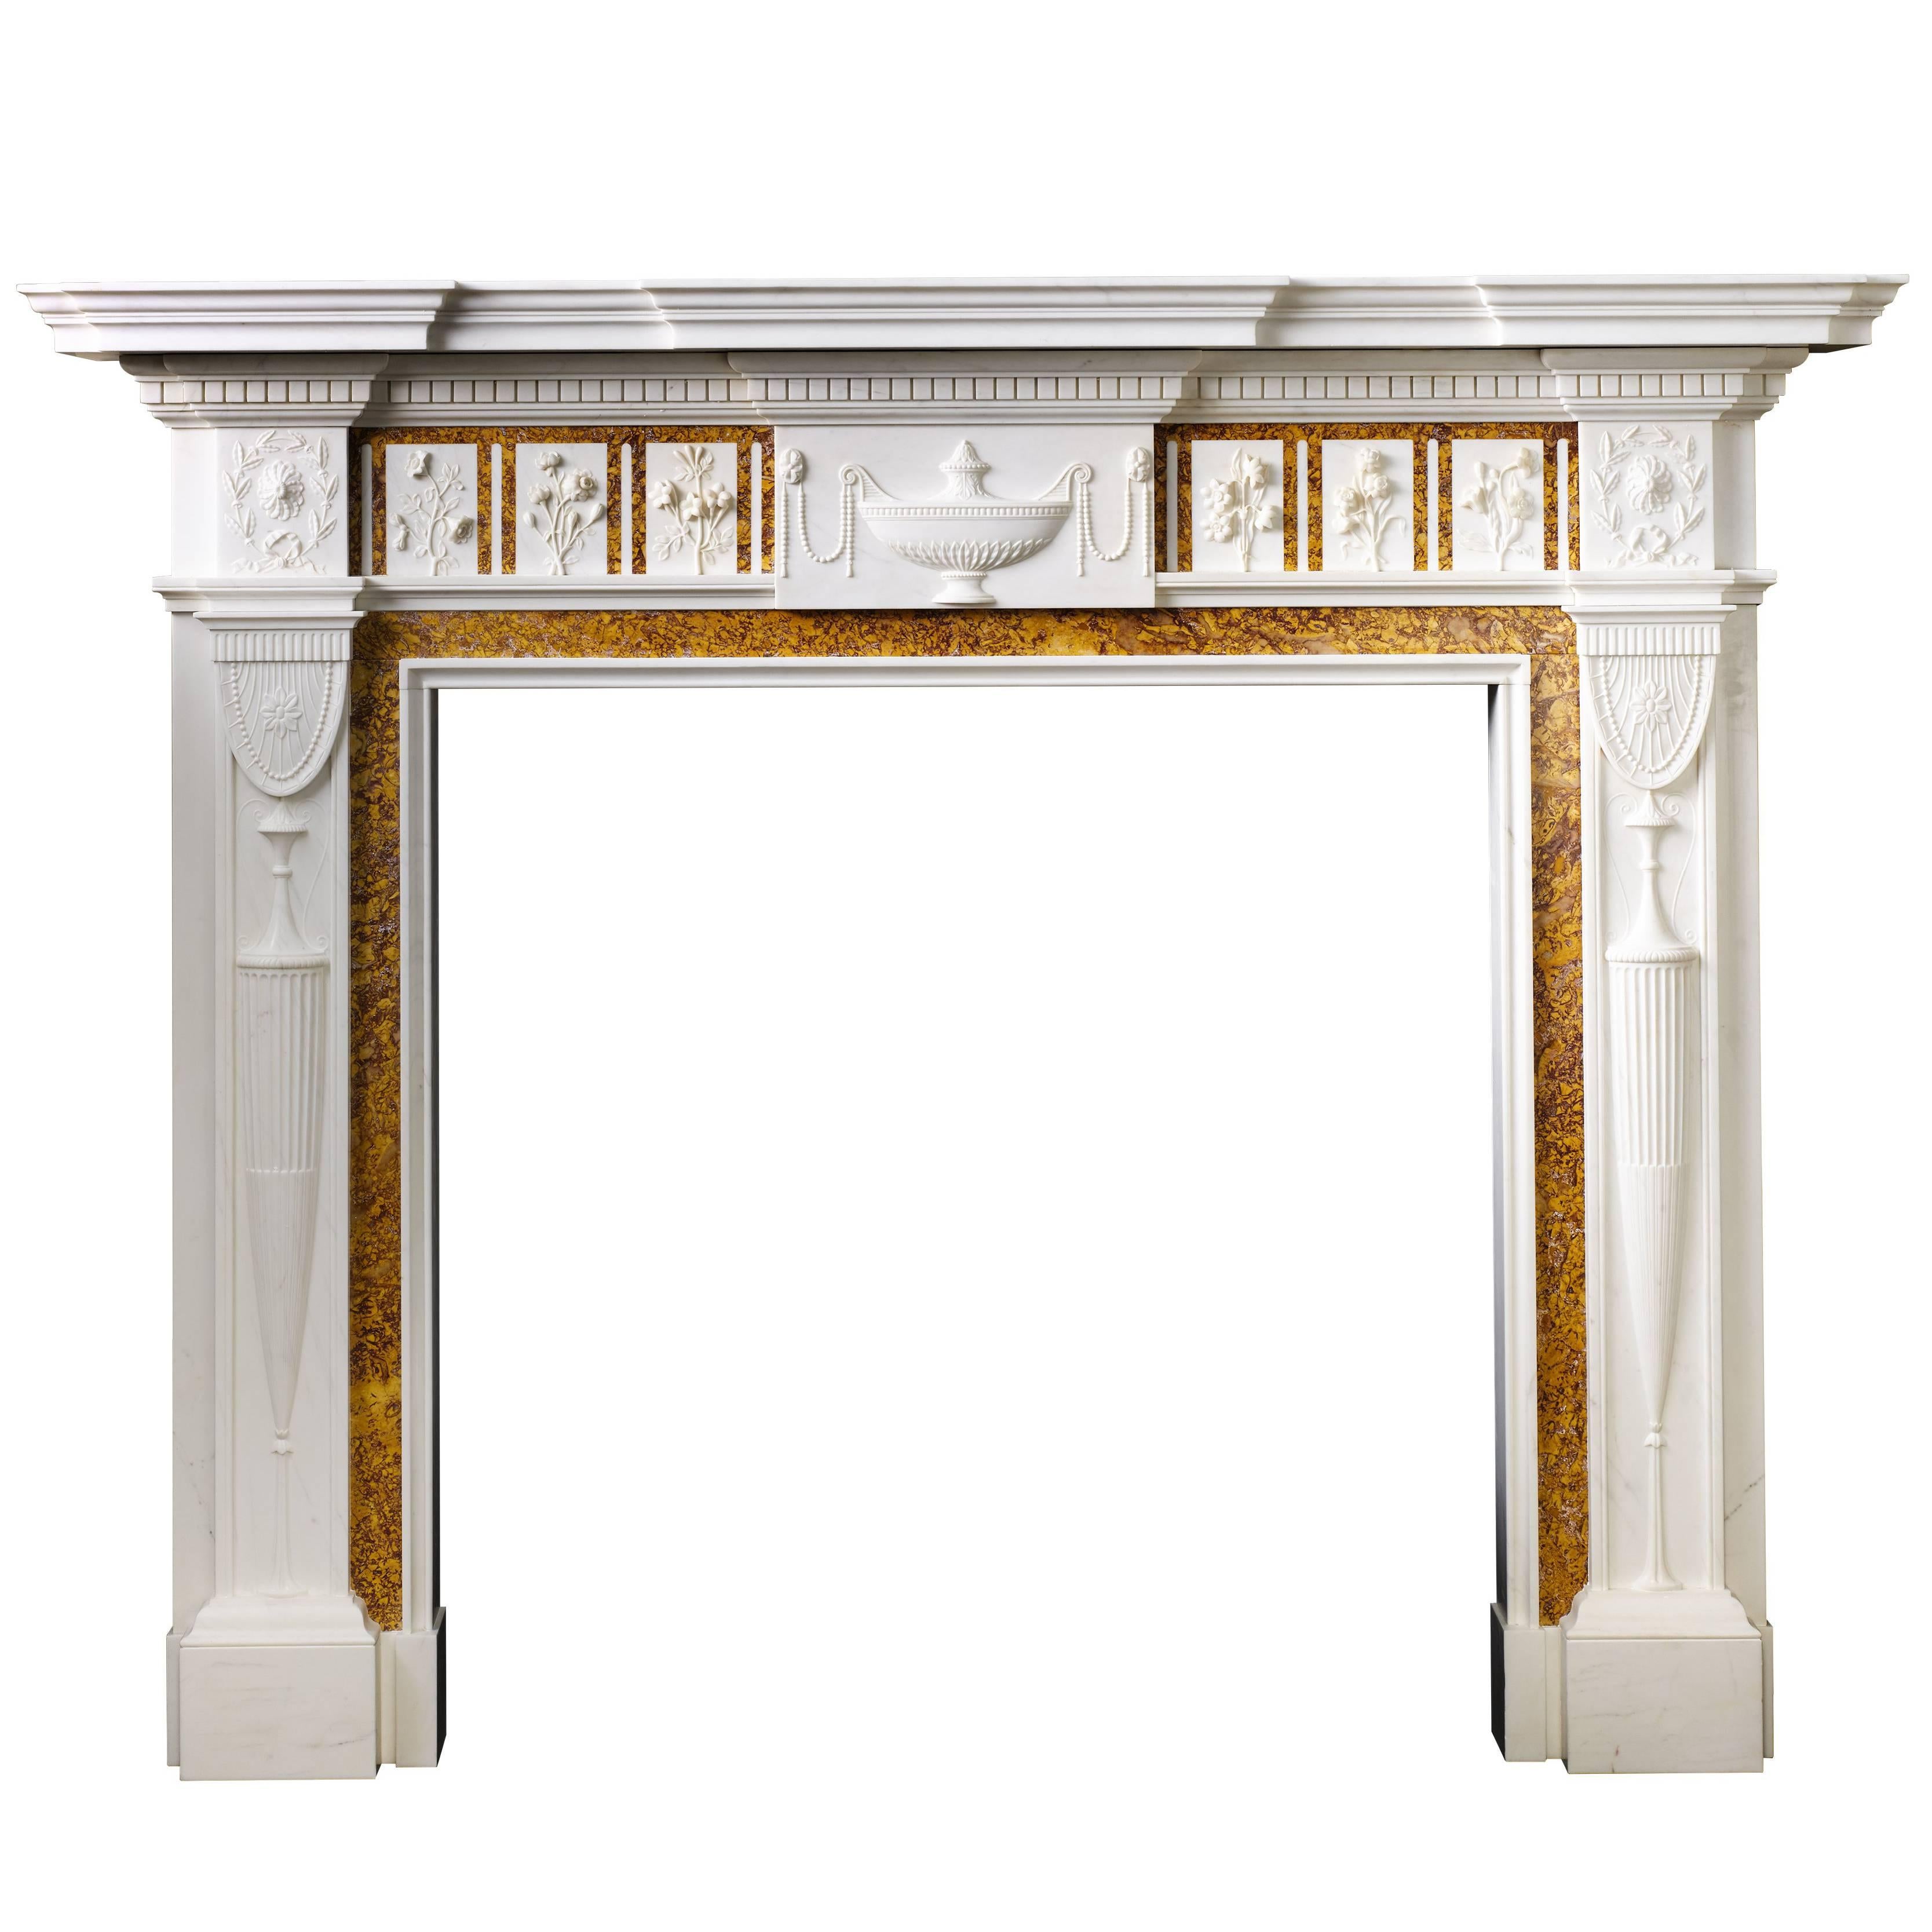 18th Century Reproduction Neo-Classical Chimneypiece Carved in Marble